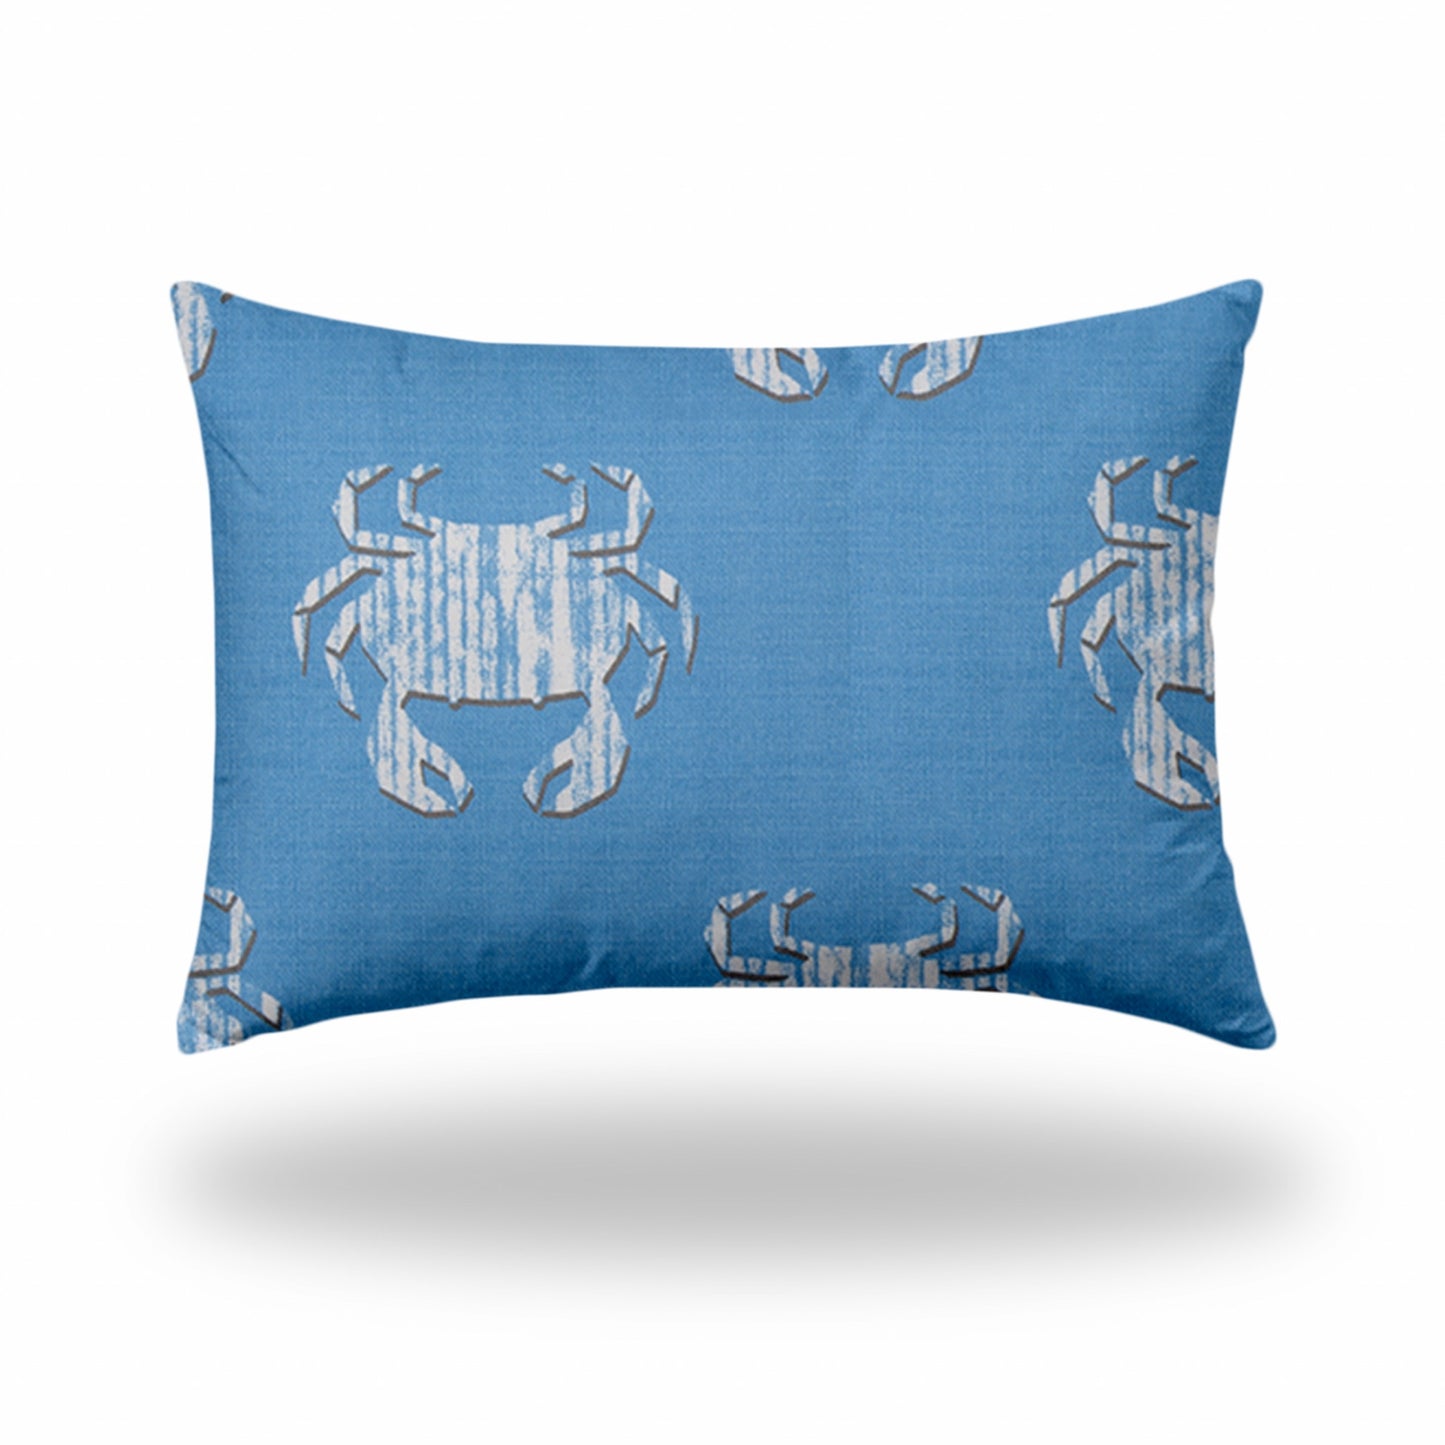 14" X 20" Blue And White Crab Zippered Coastal Lumbar Indoor Outdoor Pillow Cover